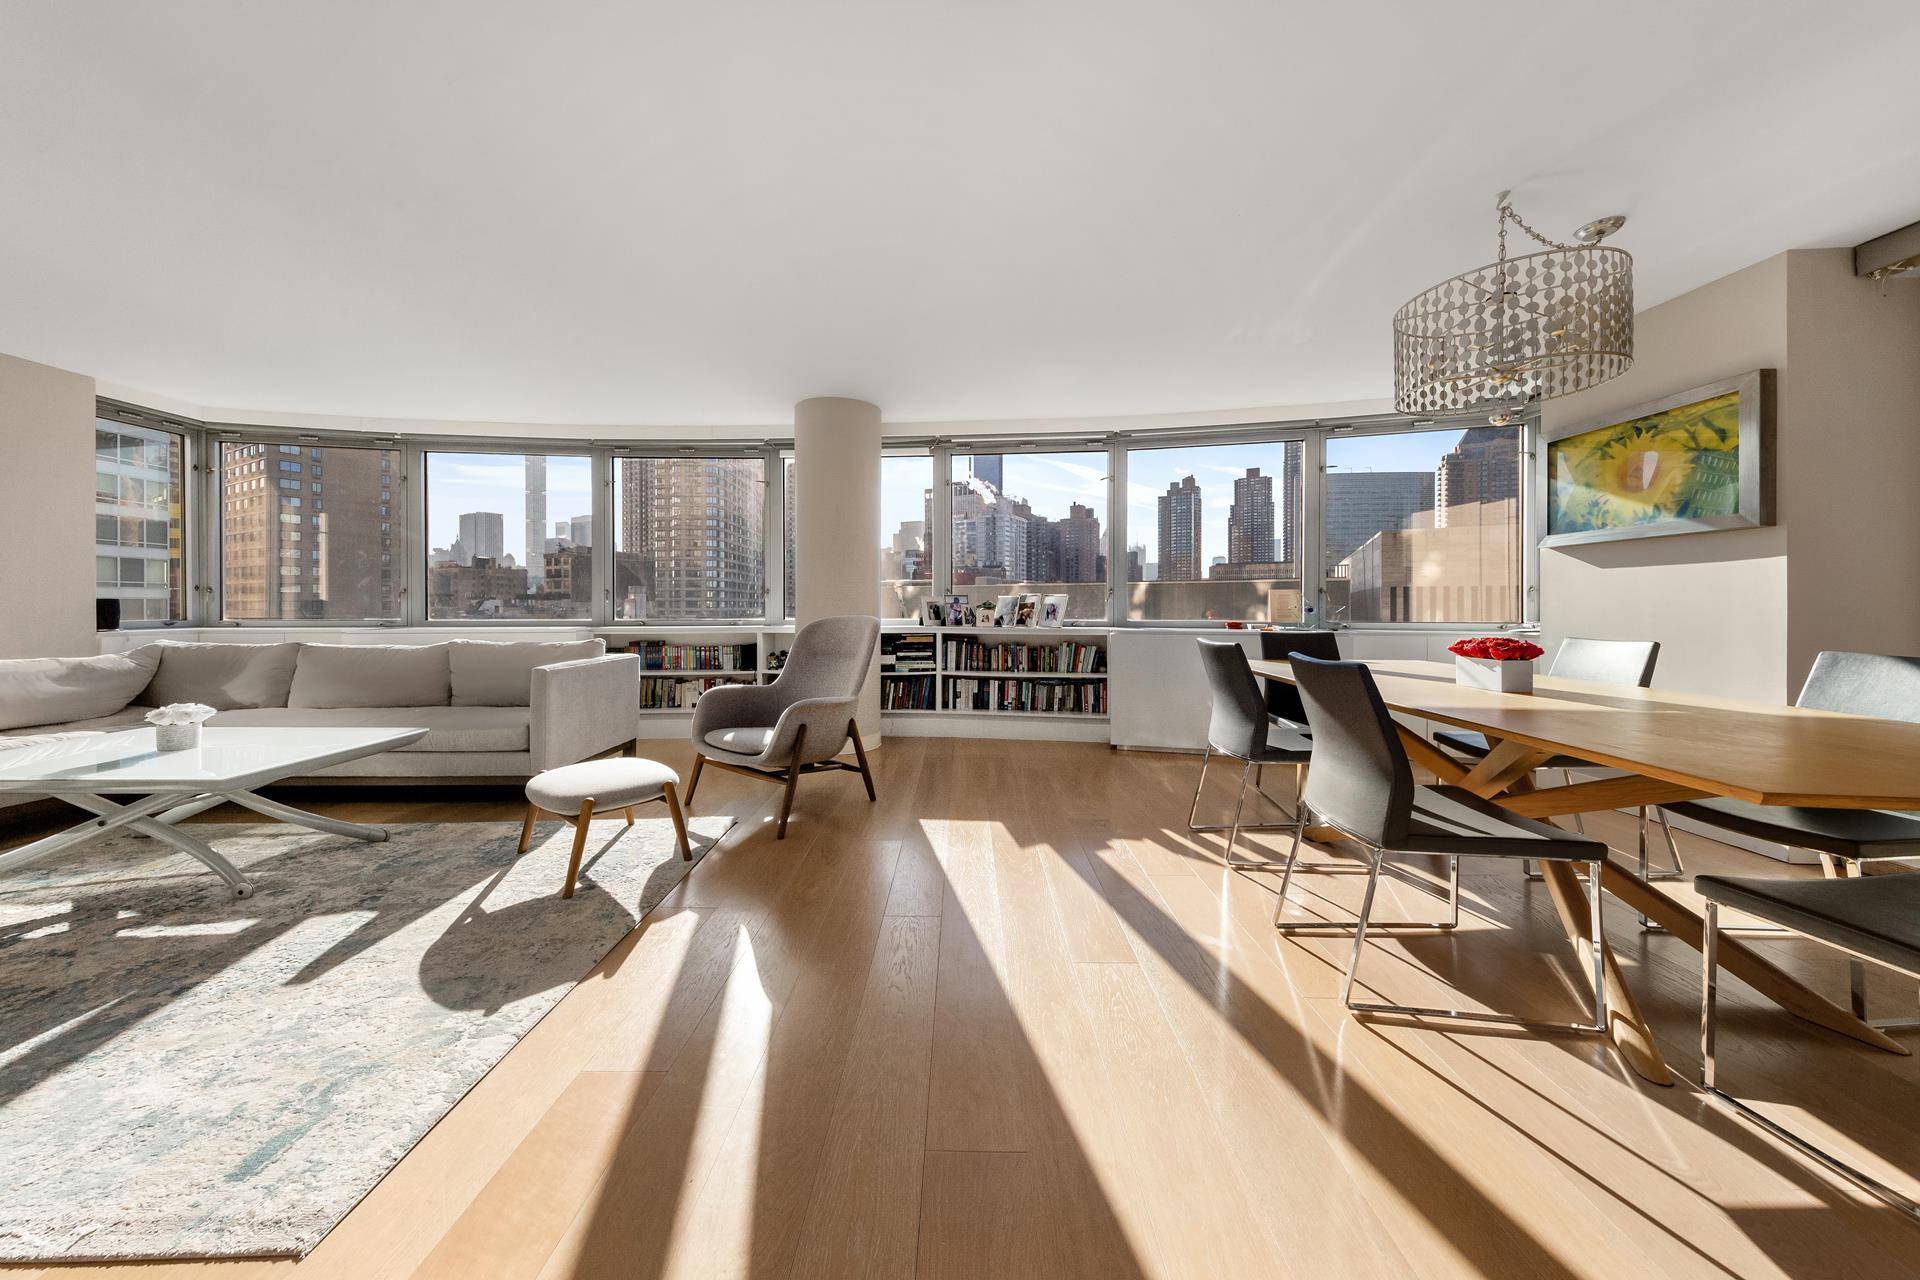 Introducing a rare opportunity to create the perfect, one of a kind 4 bedroom flex 5 residence in Lincoln center and the UWS !